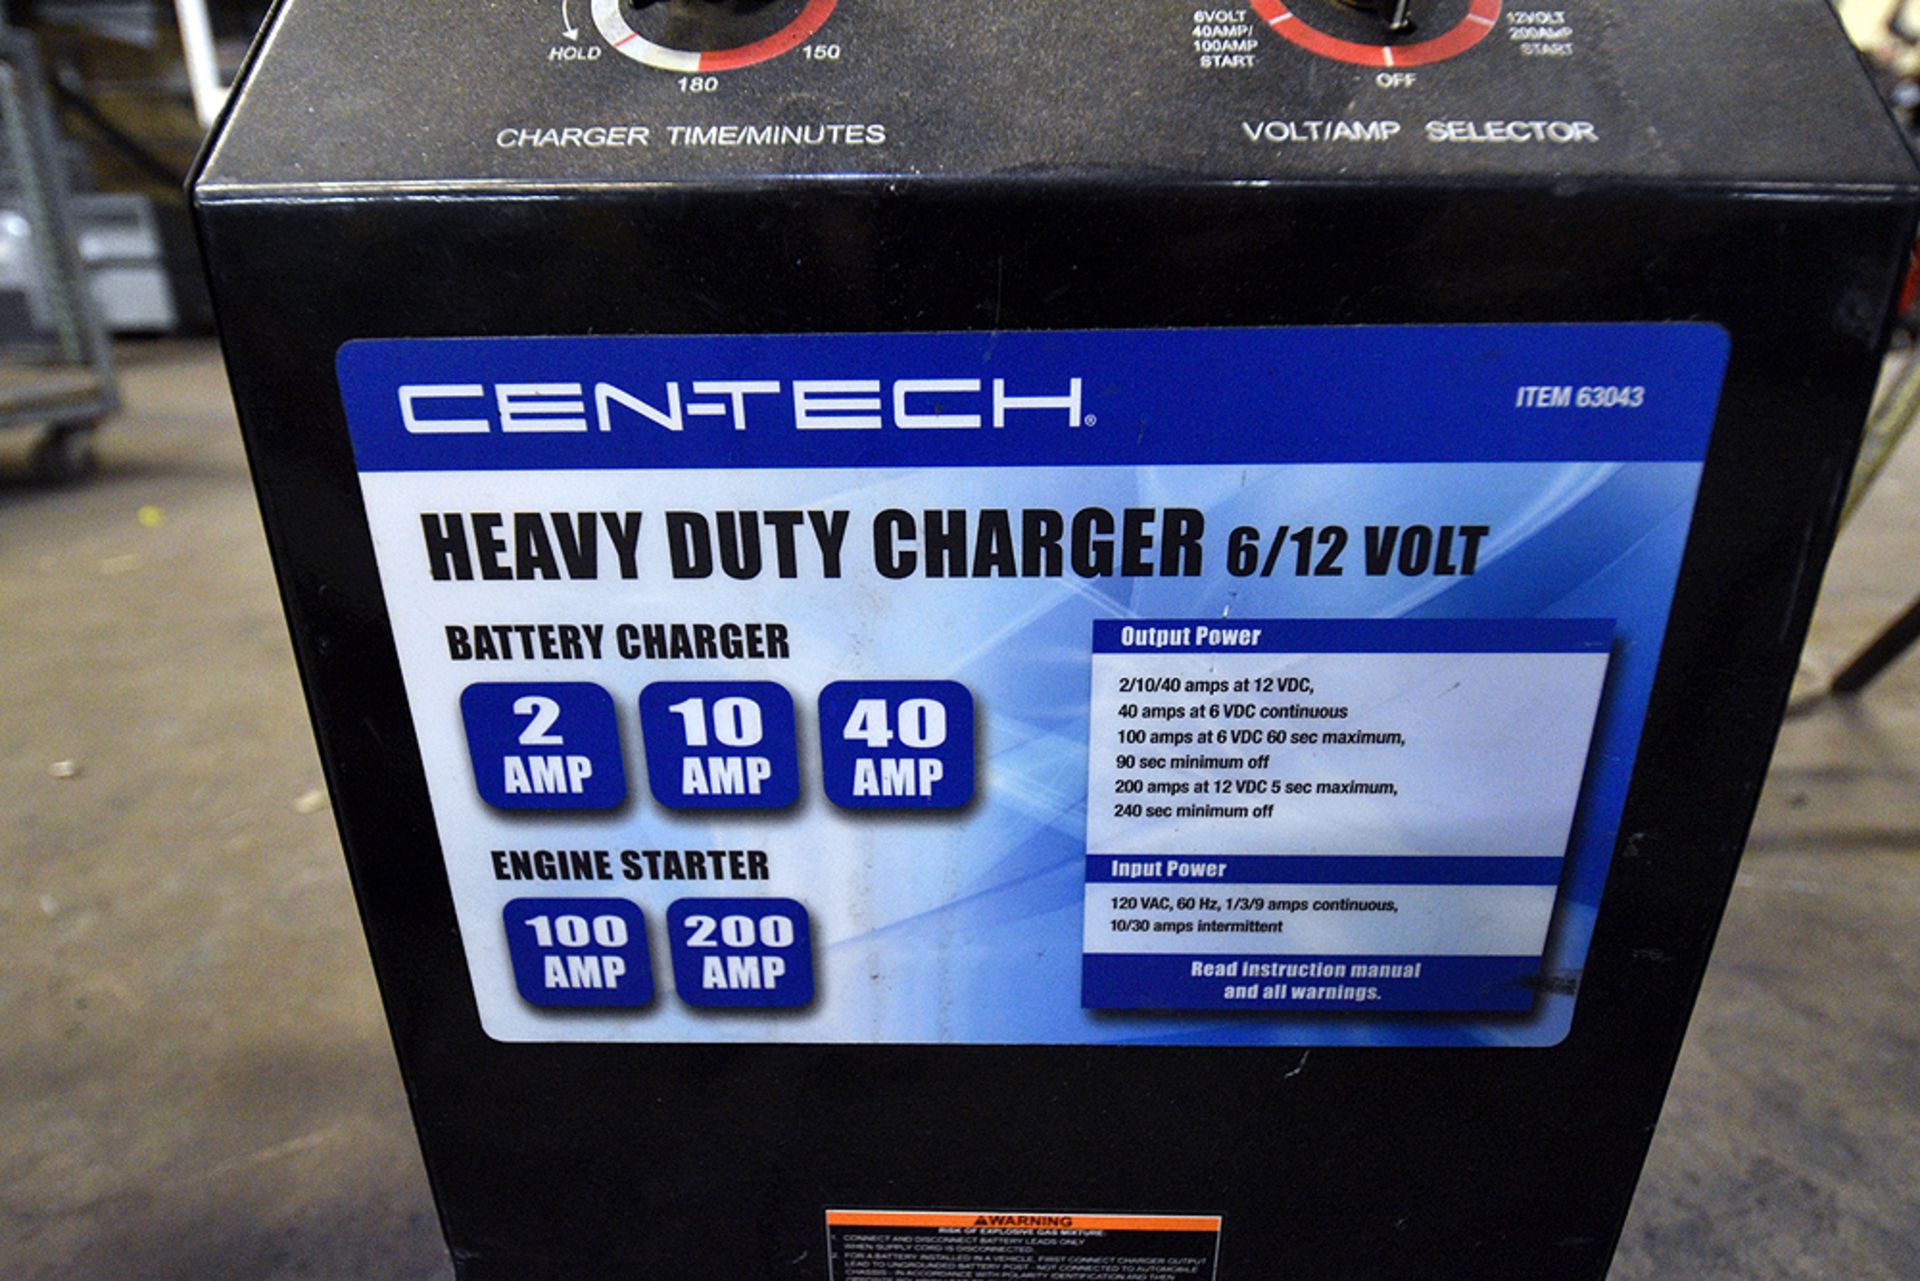 Cen-Tech Heavy Duty Charger mod 63043 - Image 3 of 3